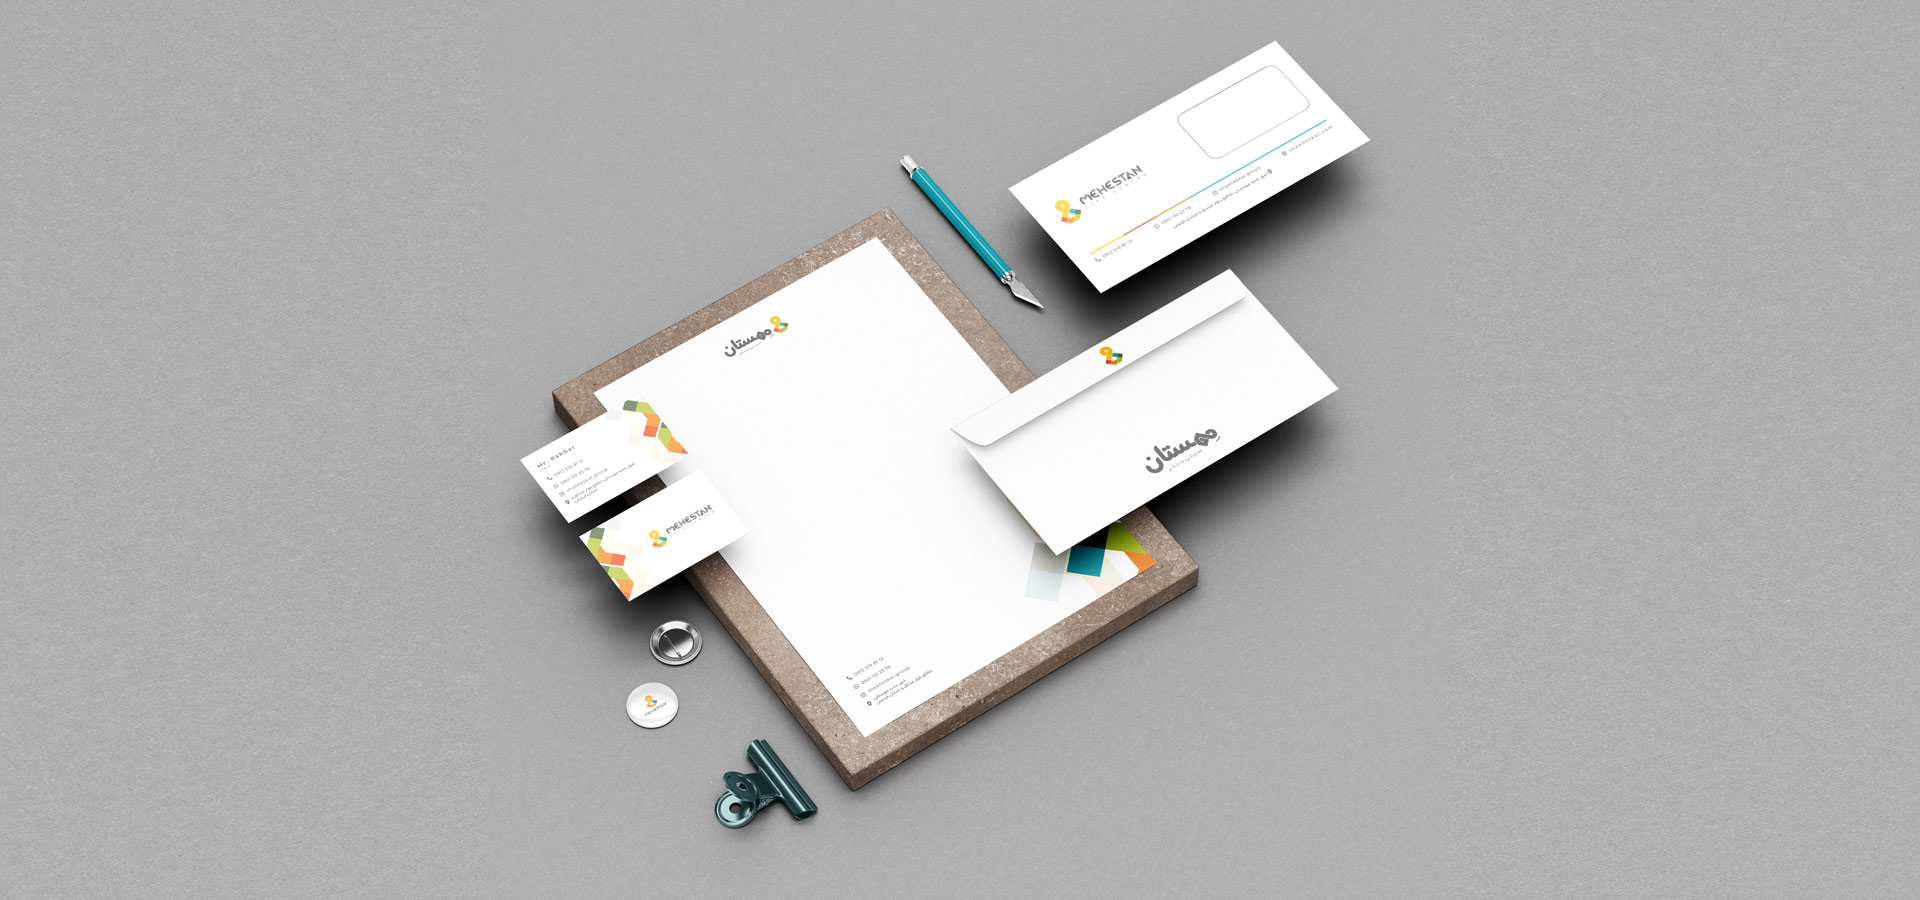 Stationary design of mall branding projects for Mehestan Brand by Zhahoo Creatice Agency.